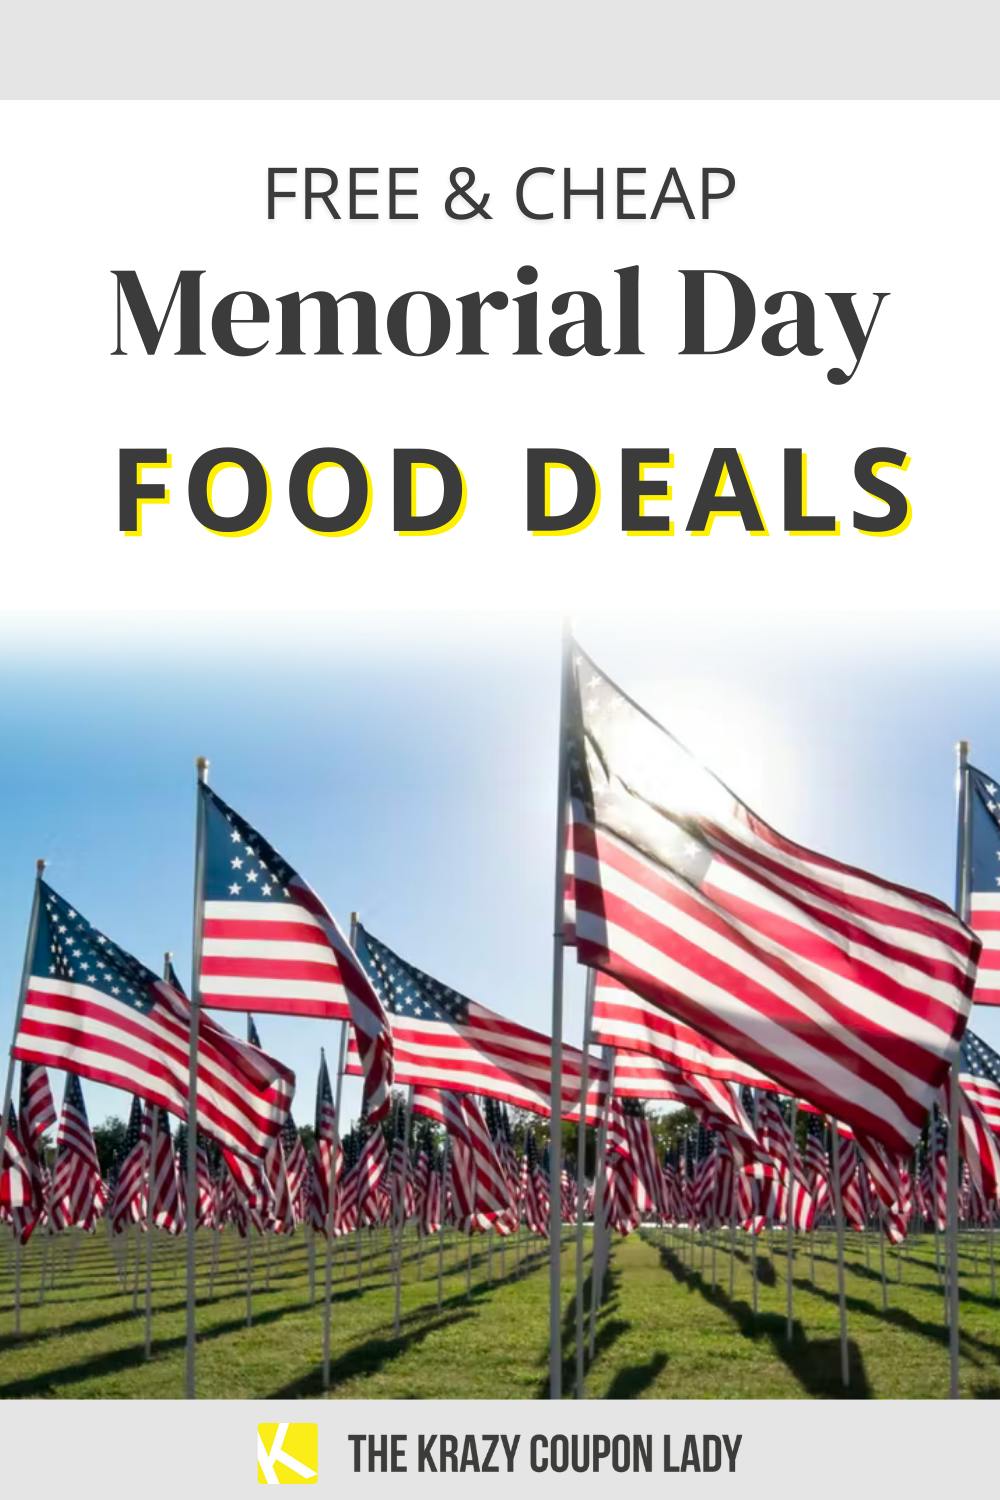 All the Free & Cheap Memorial Day Food Deals